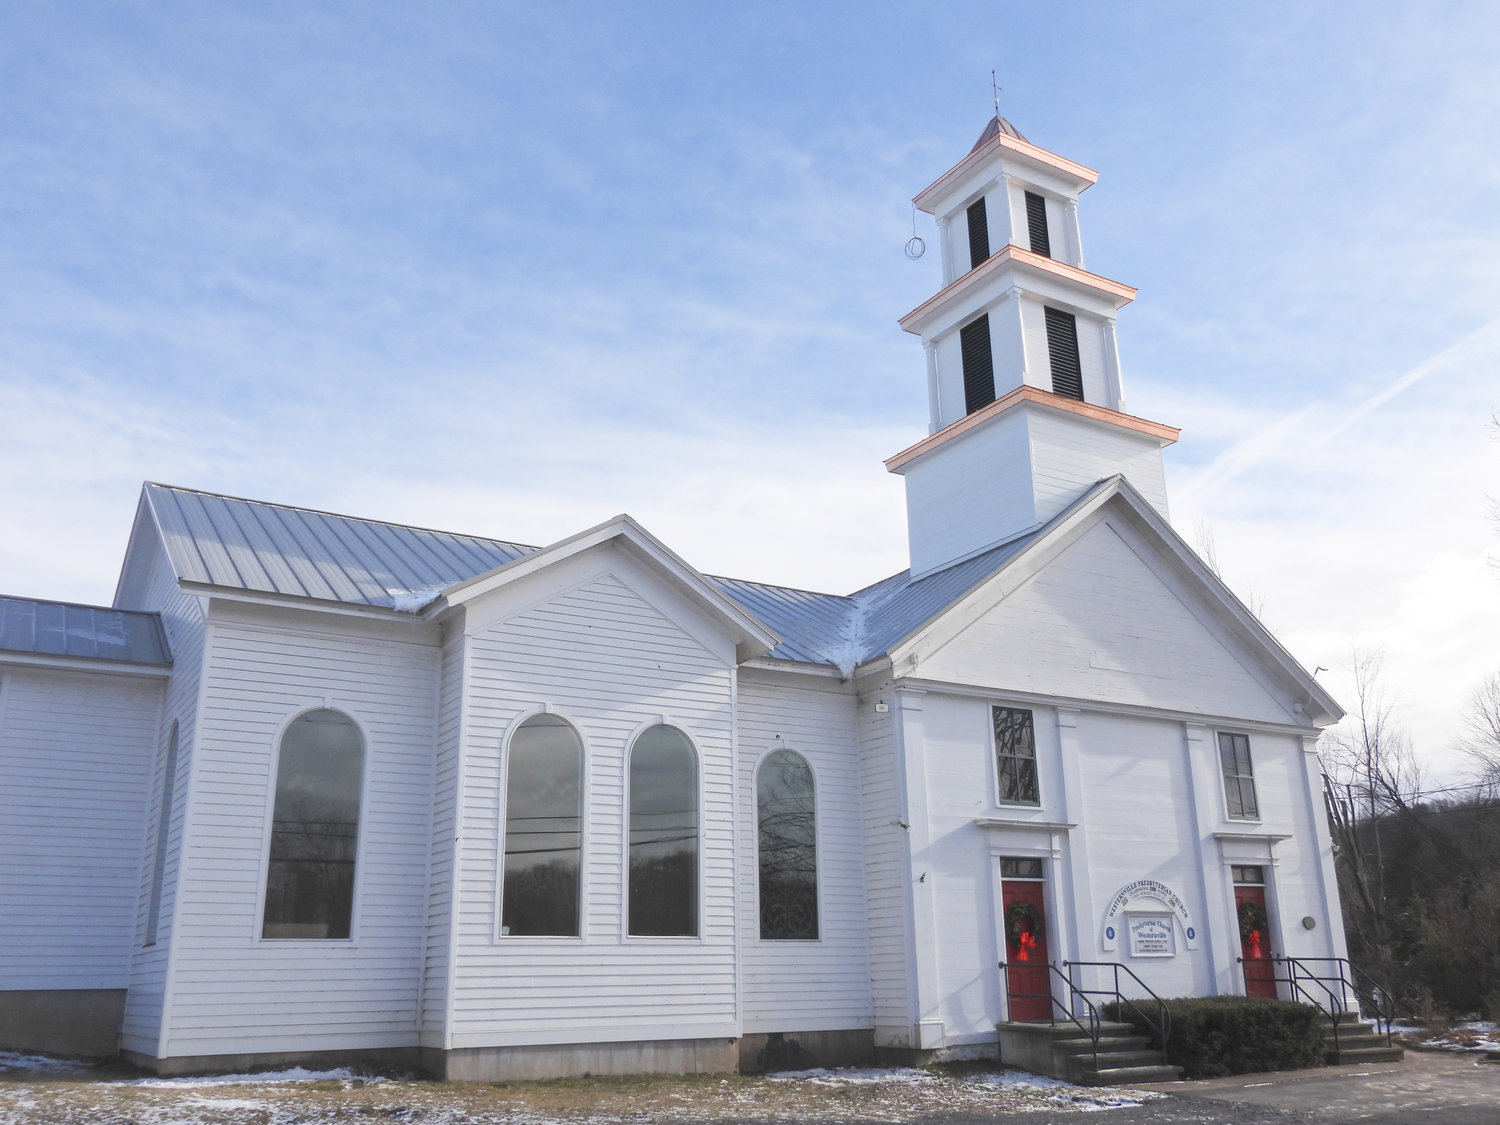 OPEN FOR CHRISTMAS — The 204-year-old Westernville Presbyterian Church on Stokes-Westernville Road will be open for Christmas Eve, by reservation only, and Sunday services for the first time since the church building was severely damaged by a tornado that touched down in the hamlet back in July.